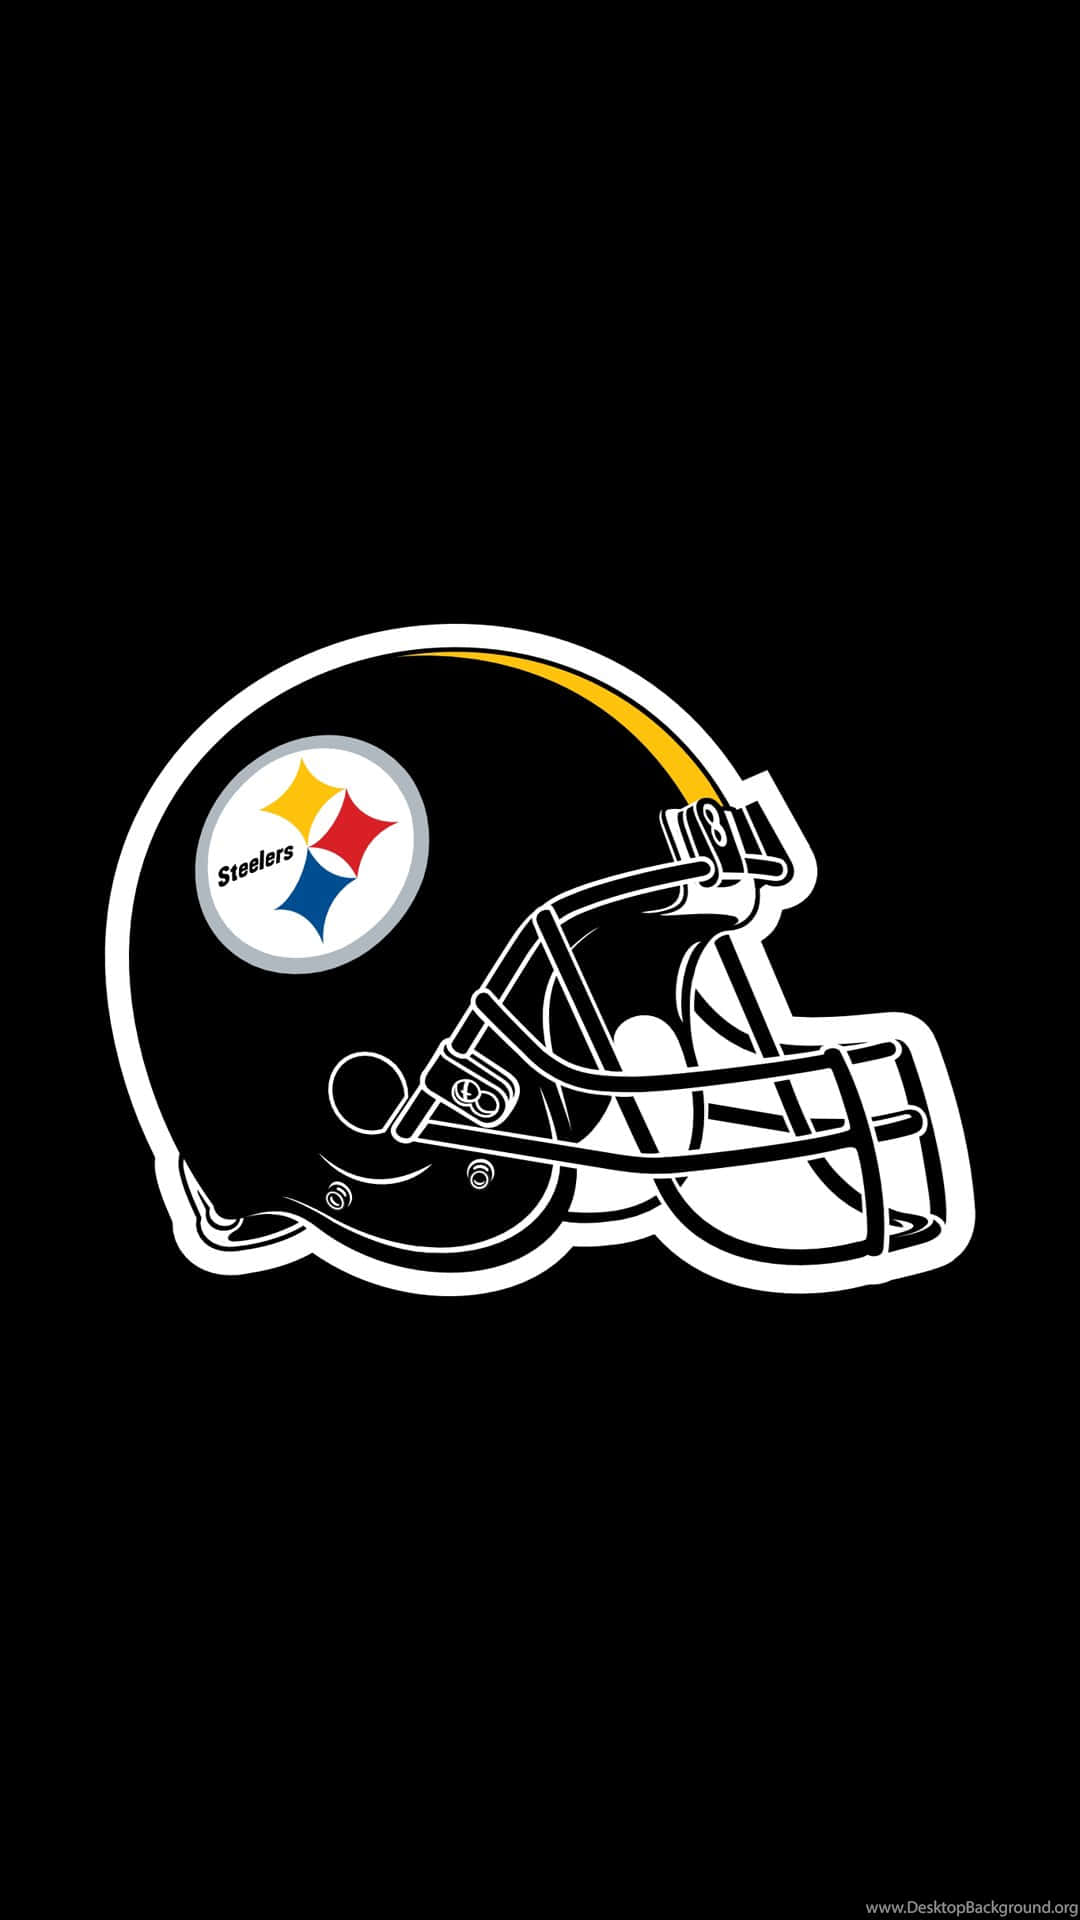 Get Your Steelers Logo Phone Today! Background